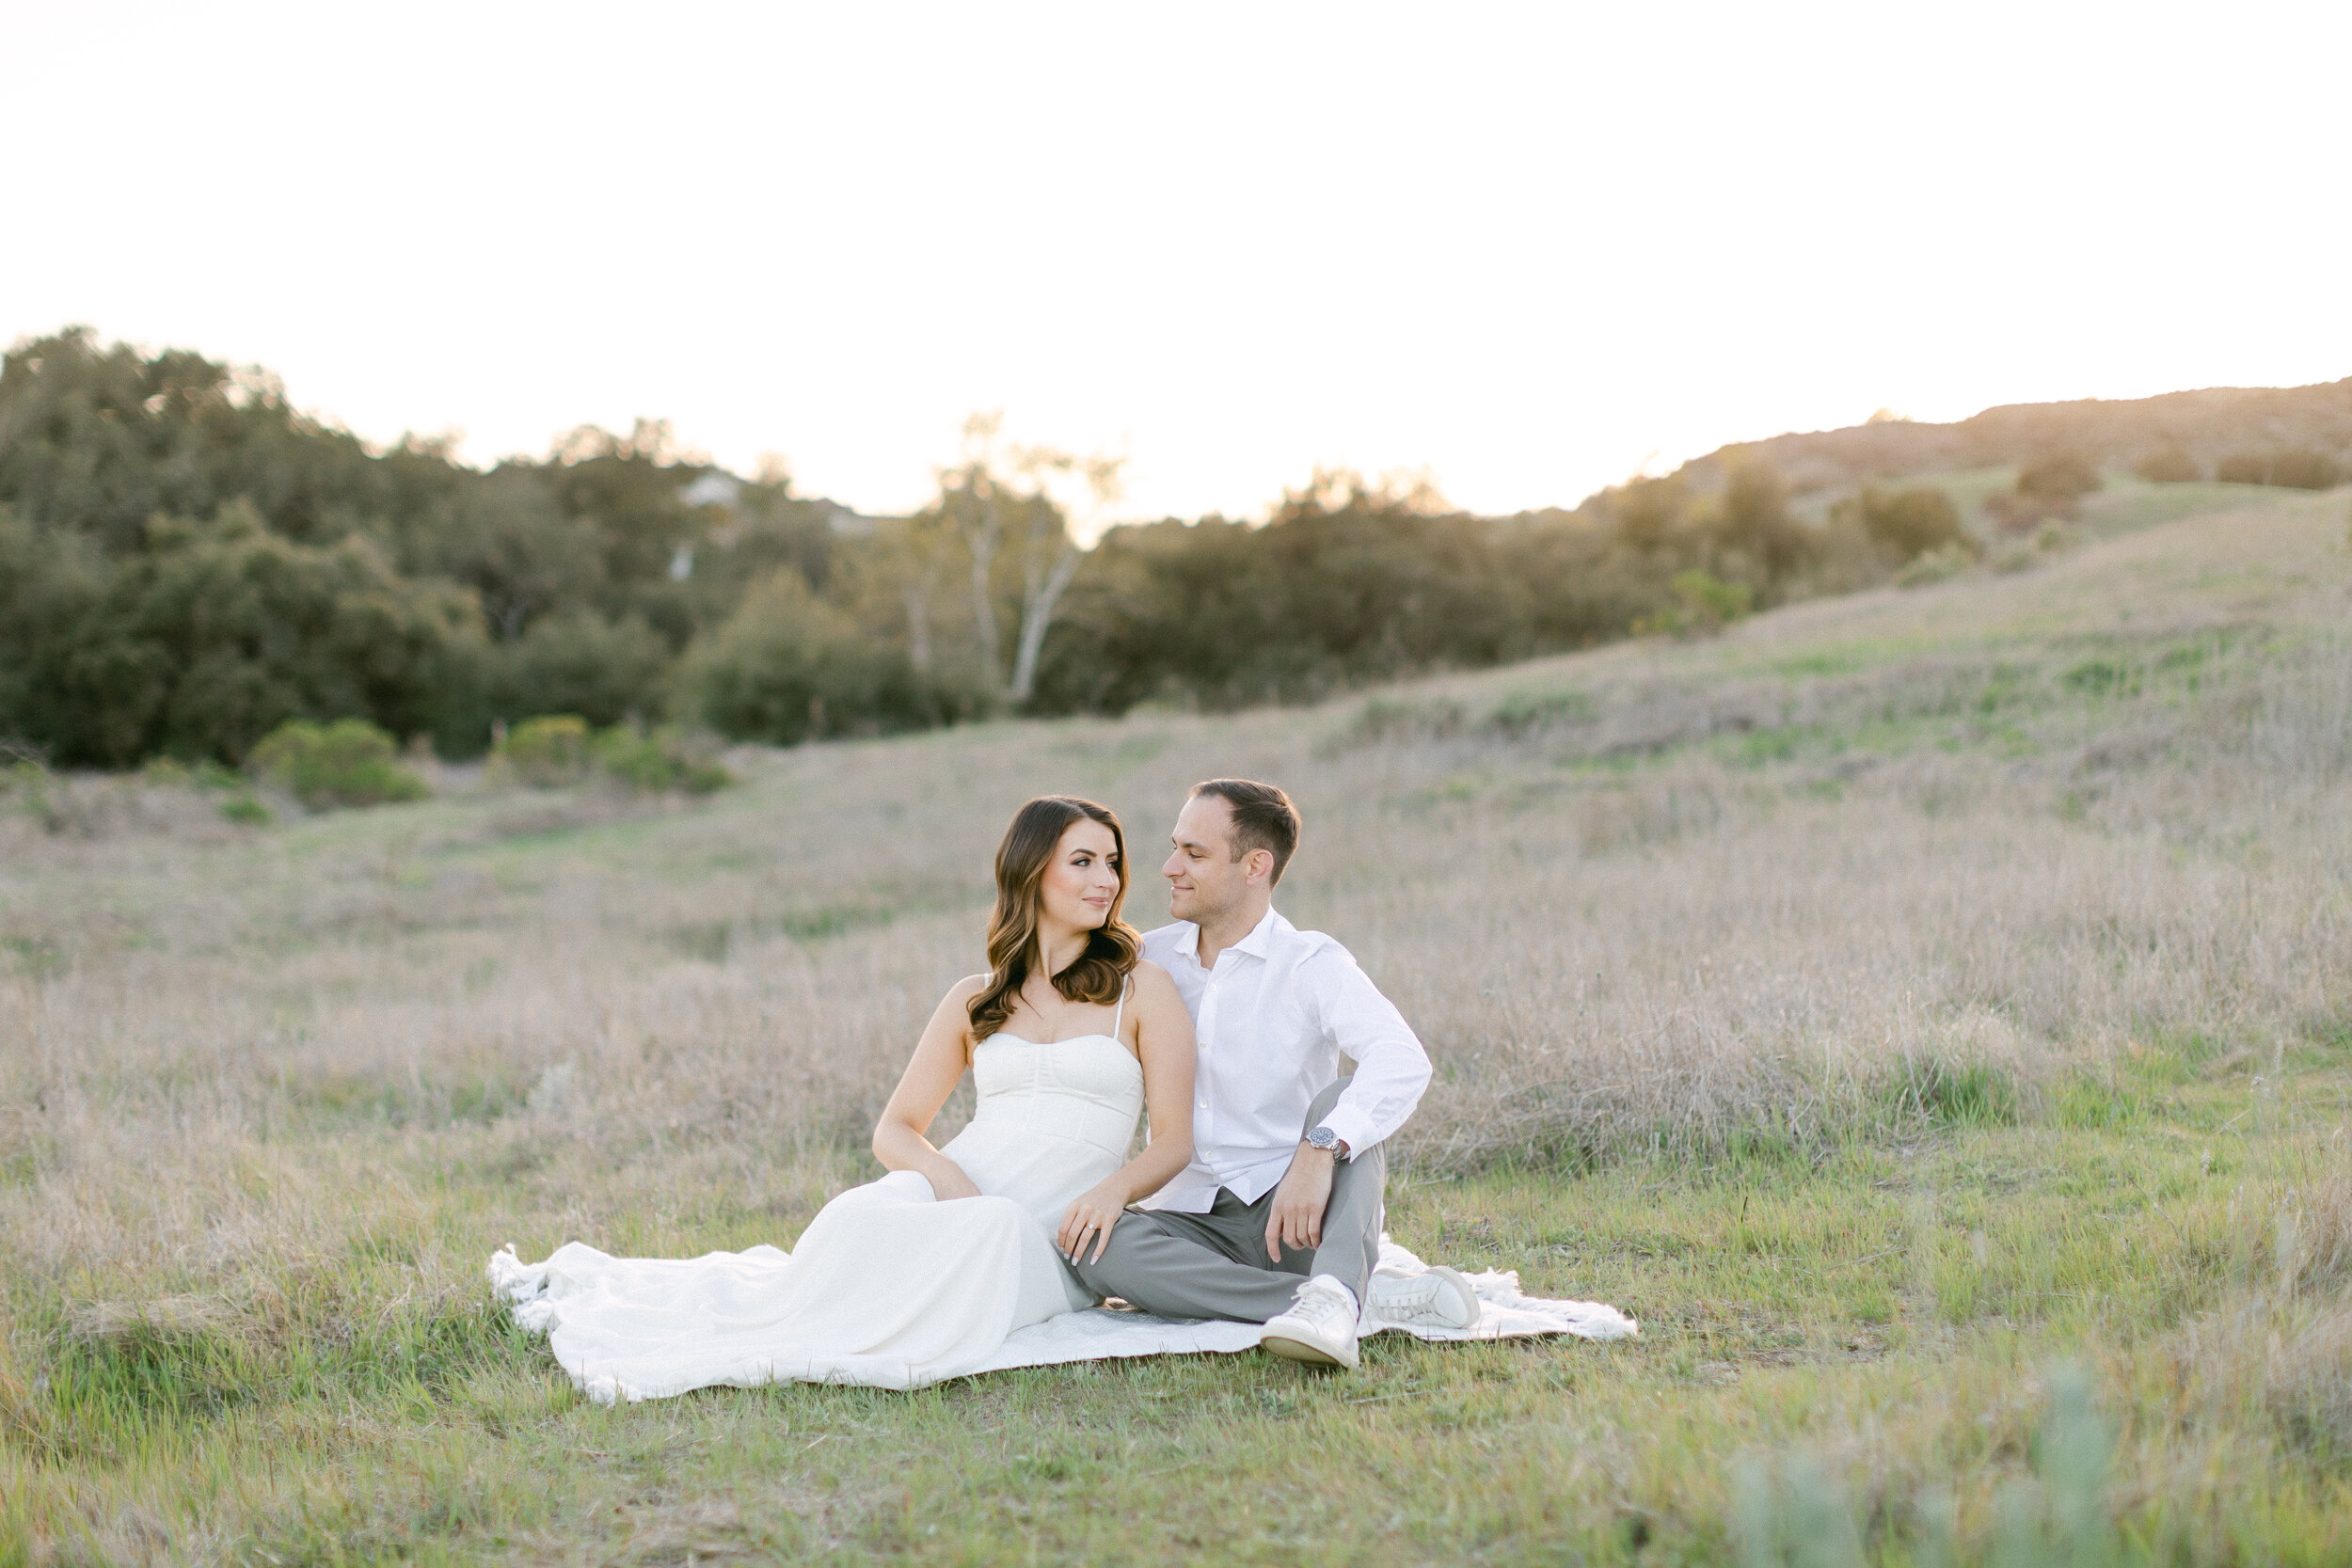 Brunette male and female sit on a blanket in a grassy field during their Orange County engagement photography session.